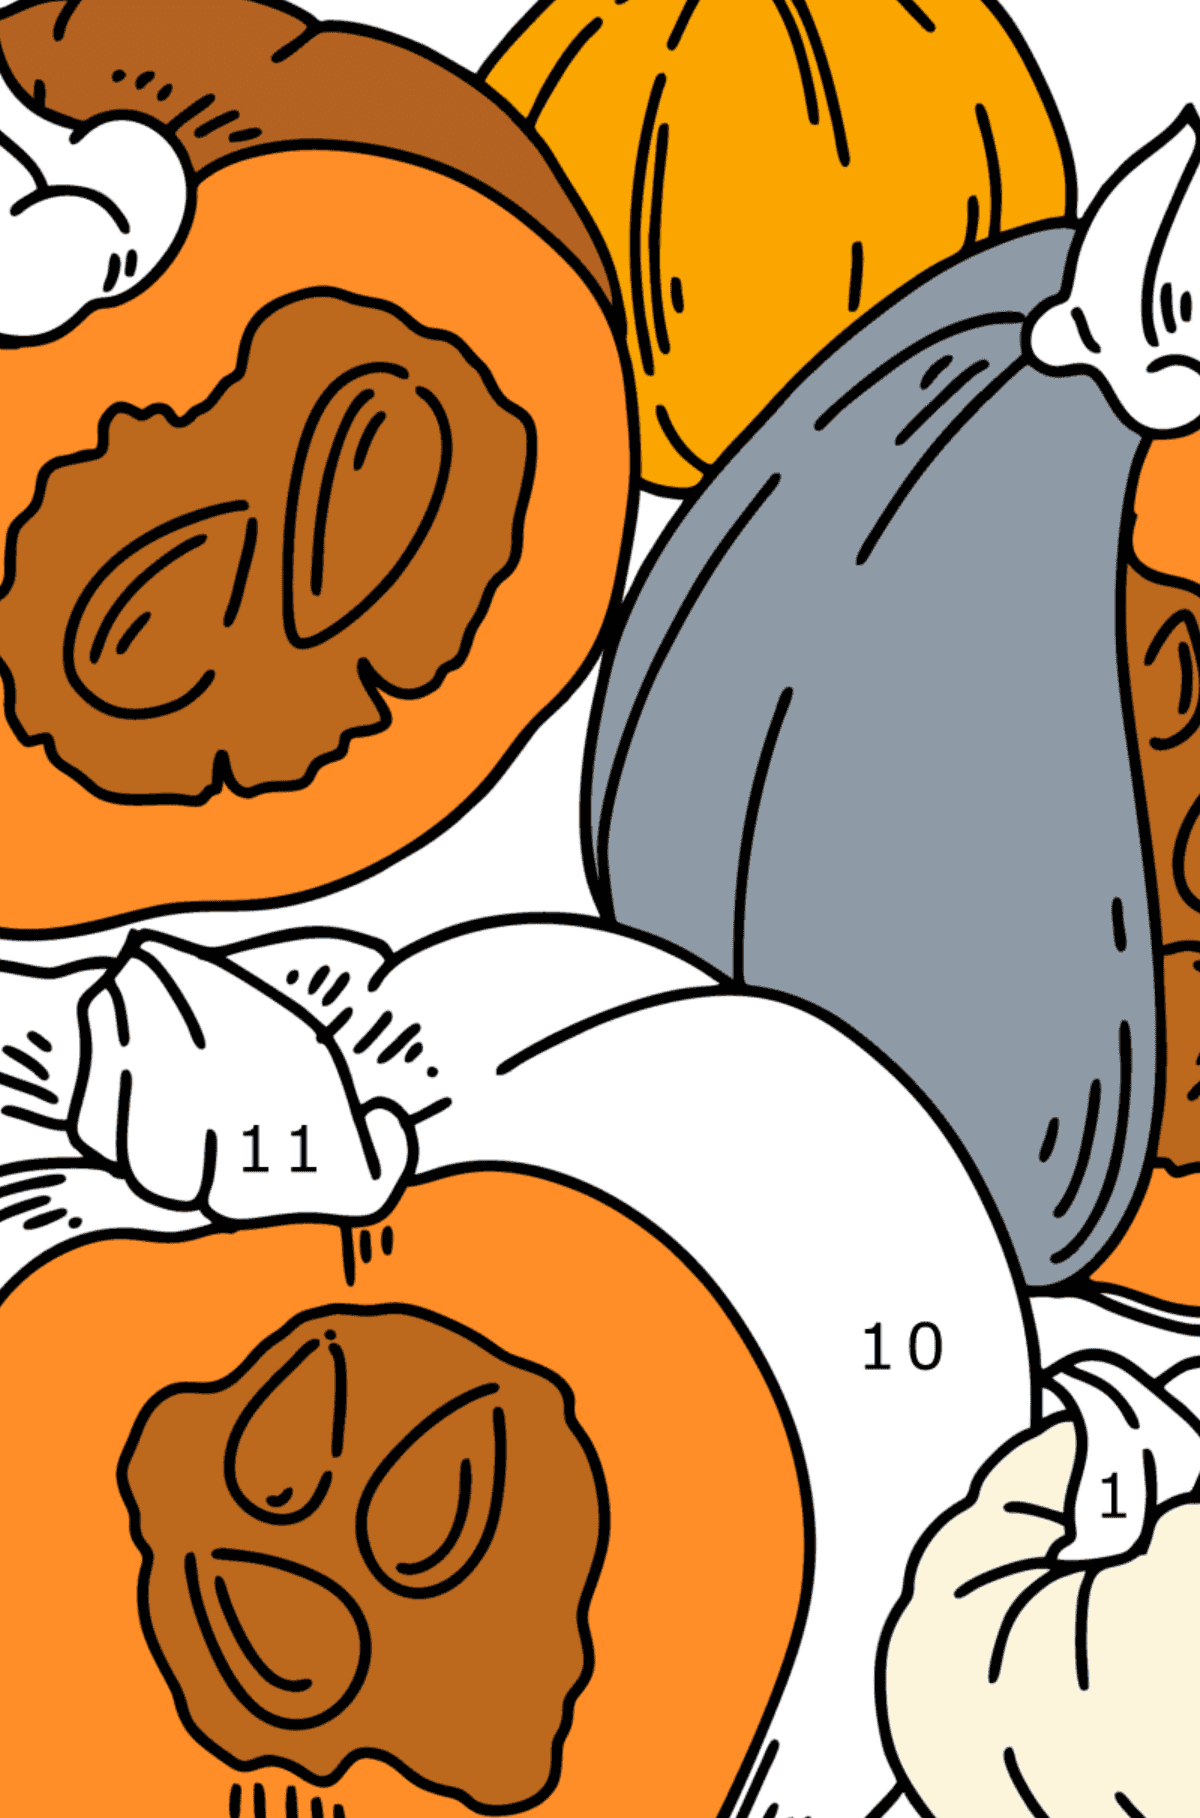 Coloring page Autumn - Pumpkin harvest - Coloring by Numbers for Kids